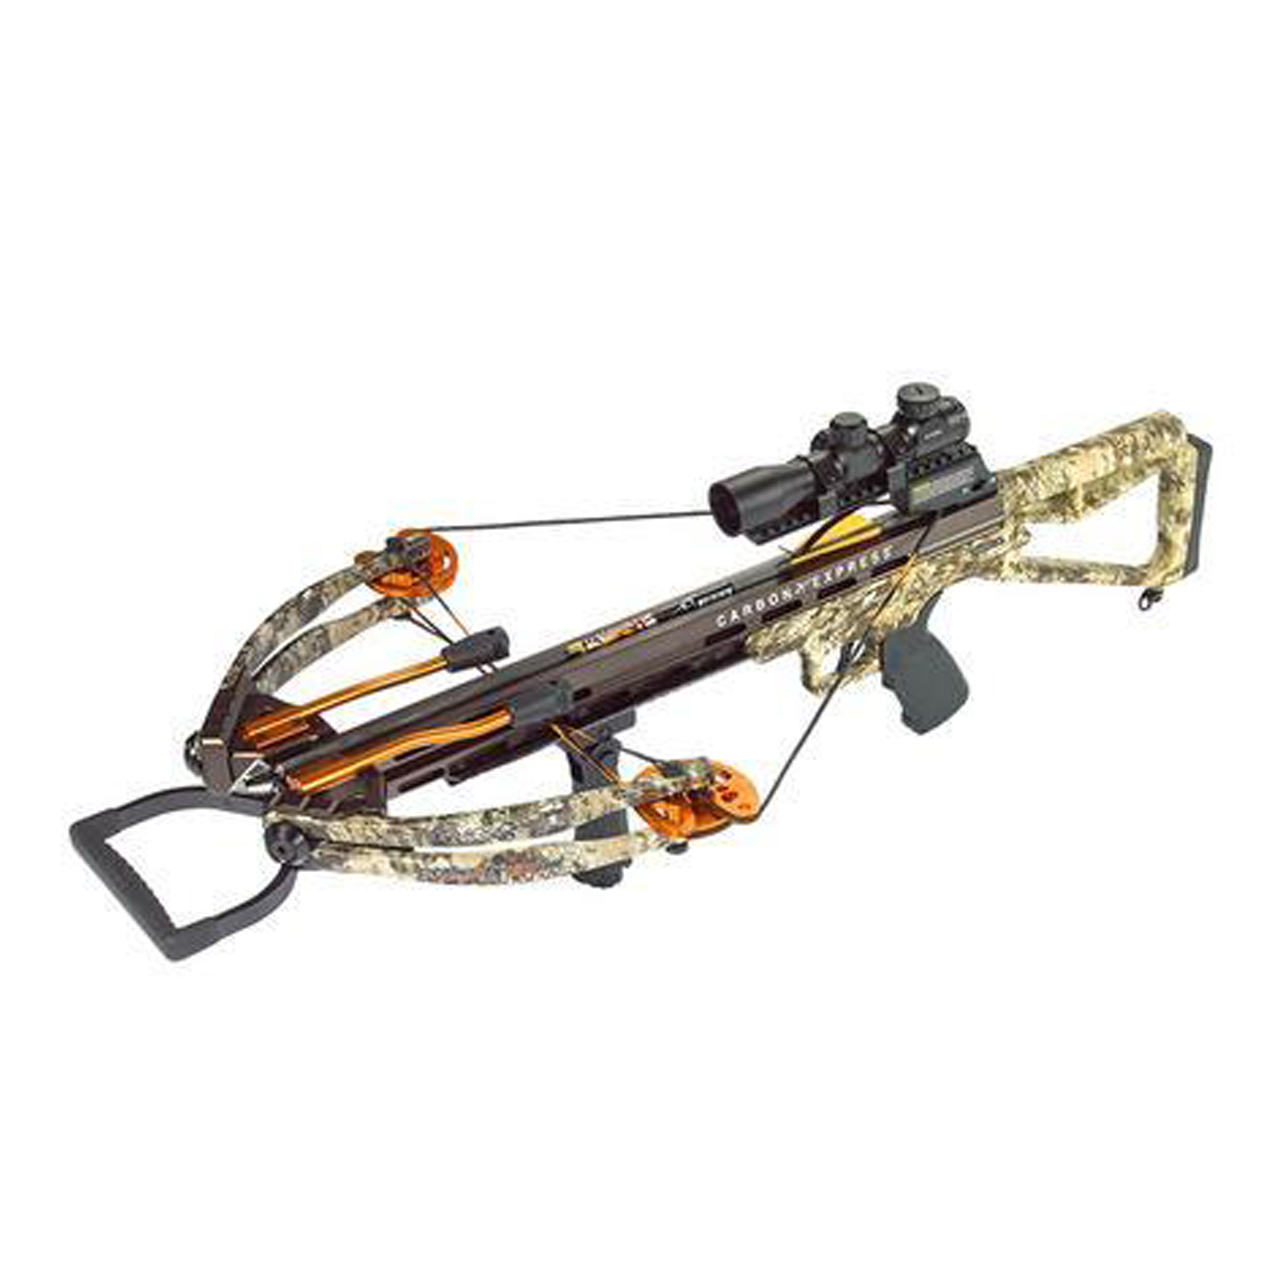 Carbon Express Covert Bloodshed Crossbow Kit